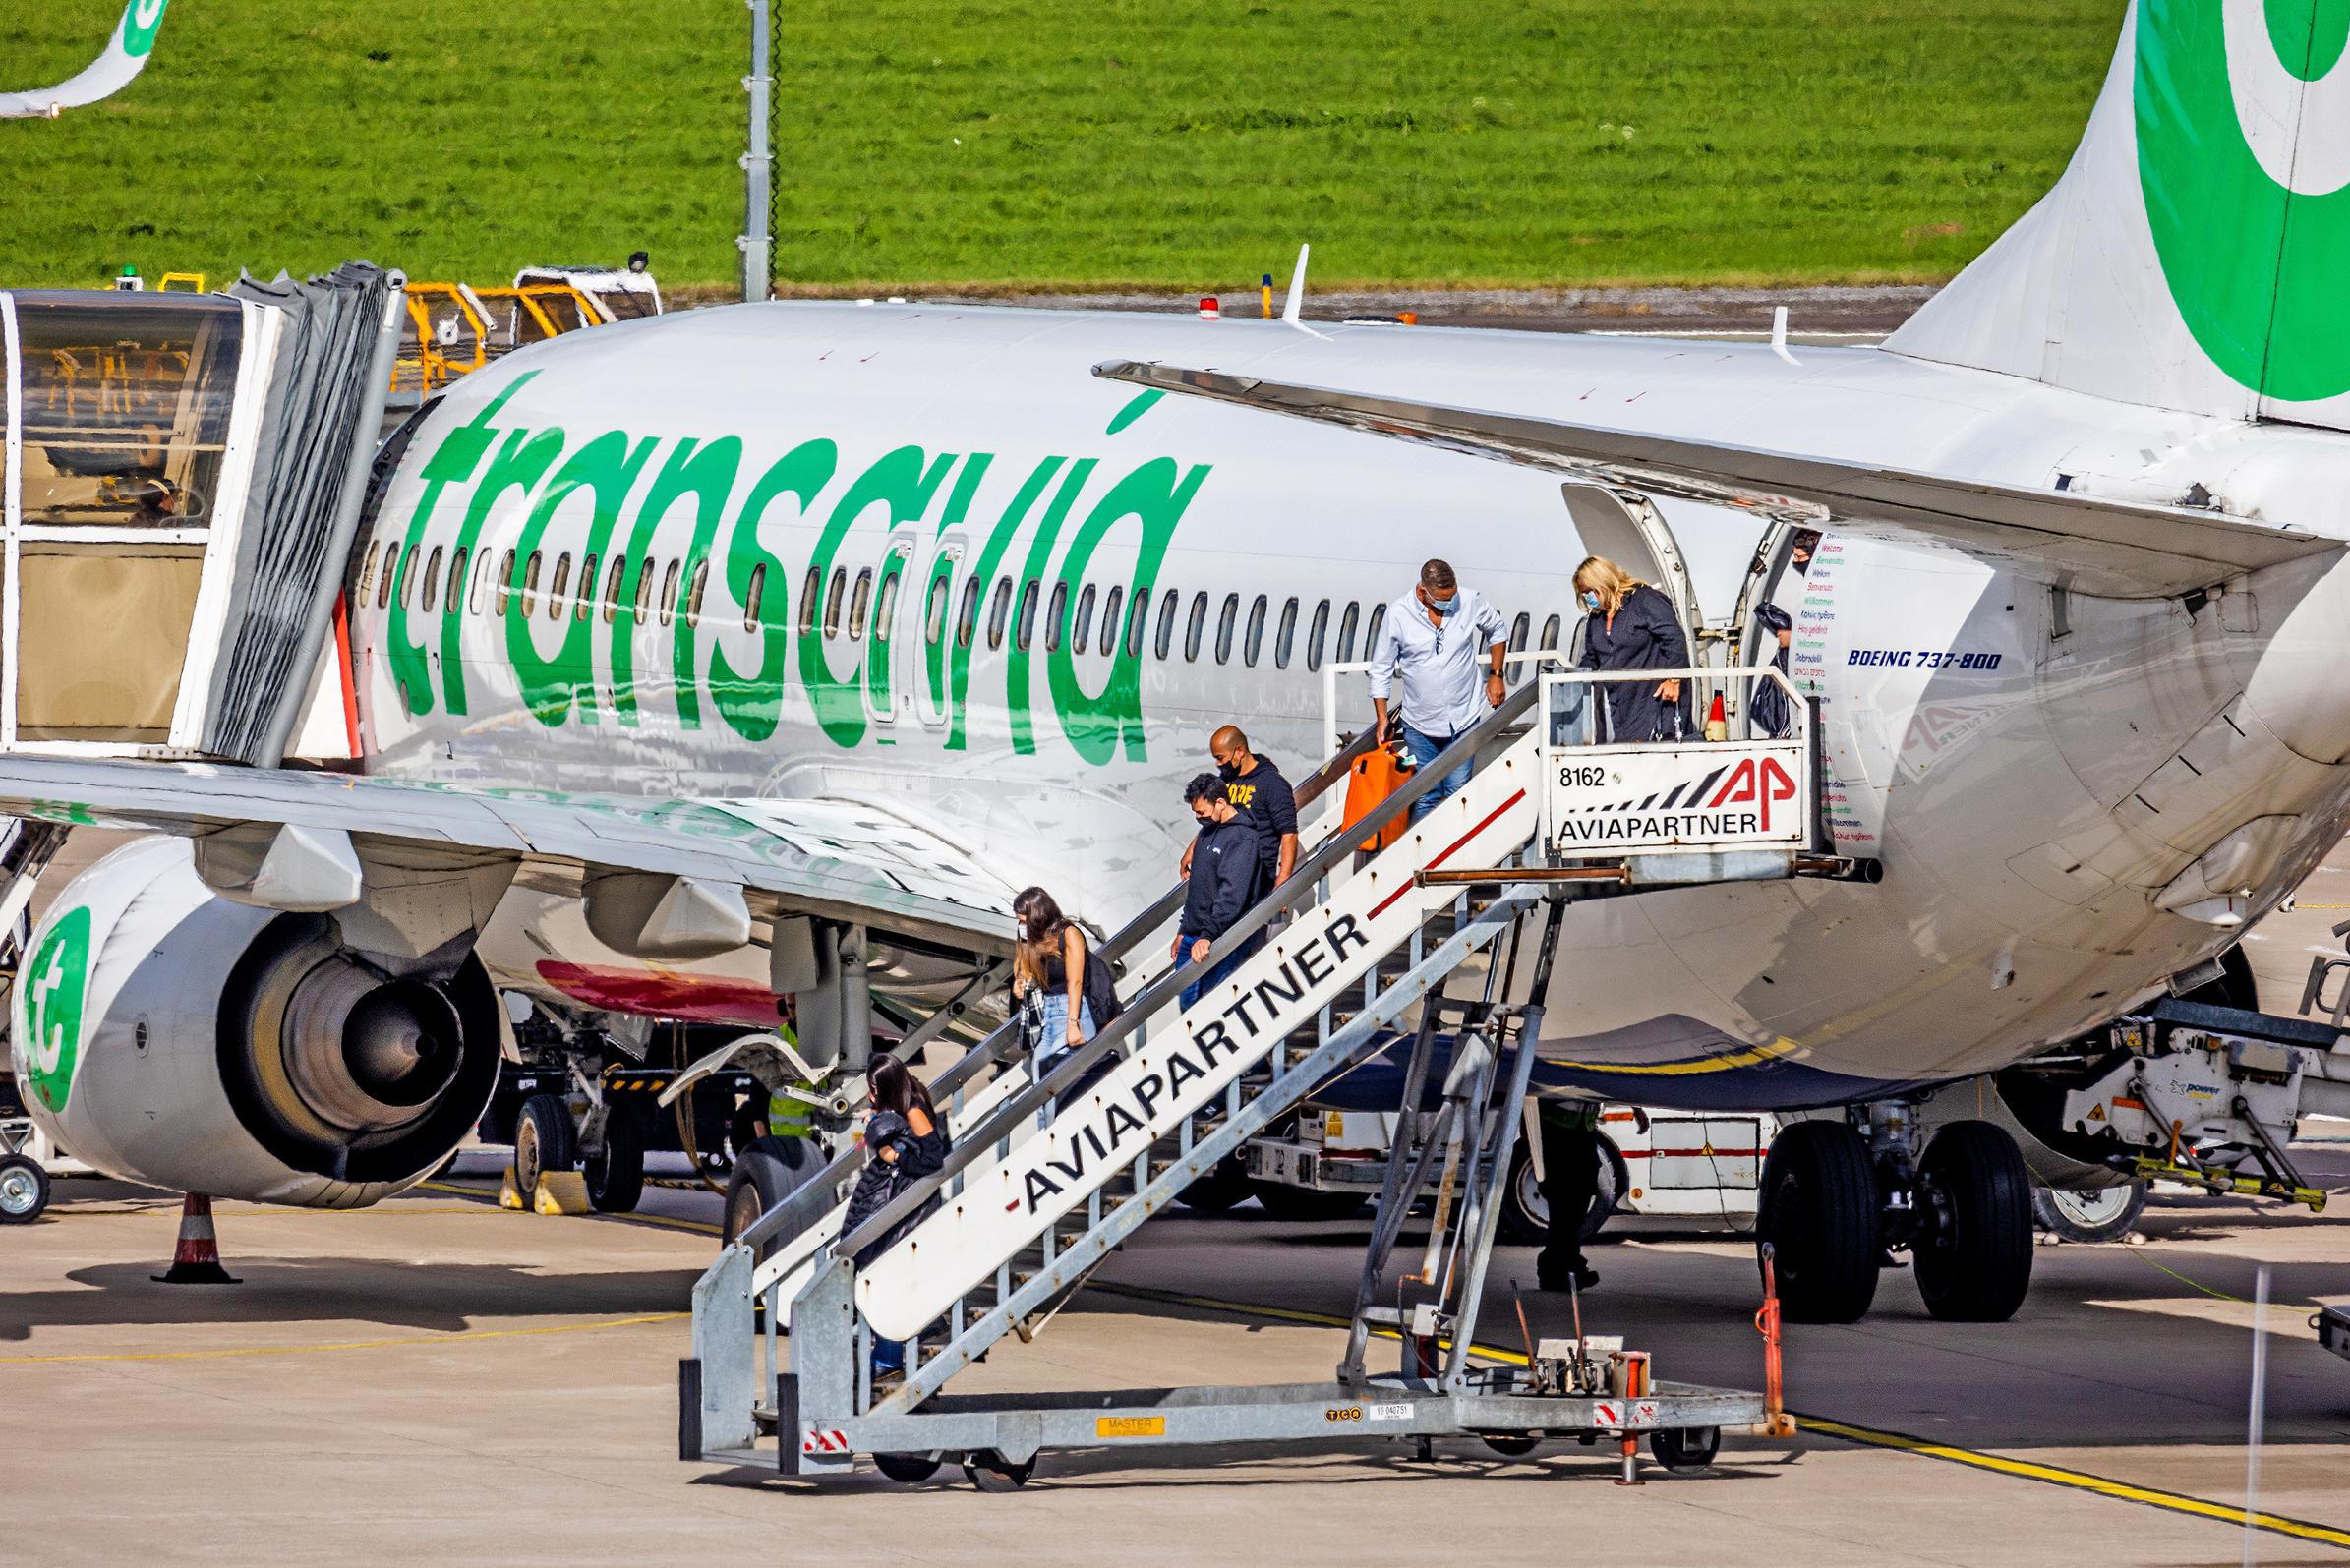 Transavia passengers are also required to pay for a carry-on suitcase as hand luggage